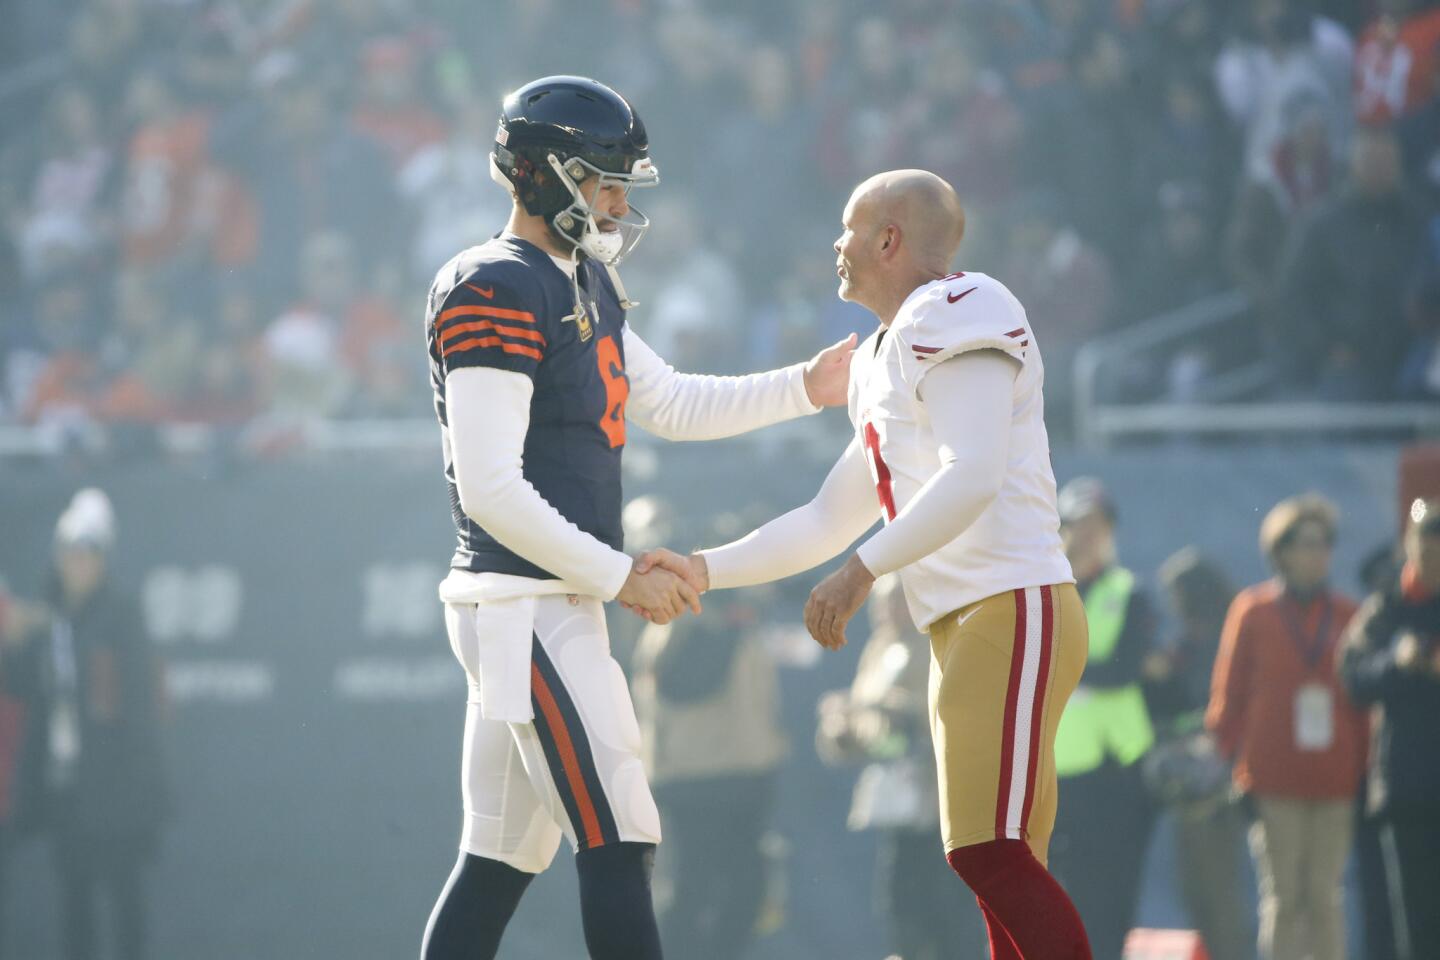 Chicago Bears quarterback Jay Cutler shakes hands with San Francisco 49ers kicker Phil Dawson after the coin toss before the start of the game at Solider Field Sunday, Dec. 6 2015, in Chicago.